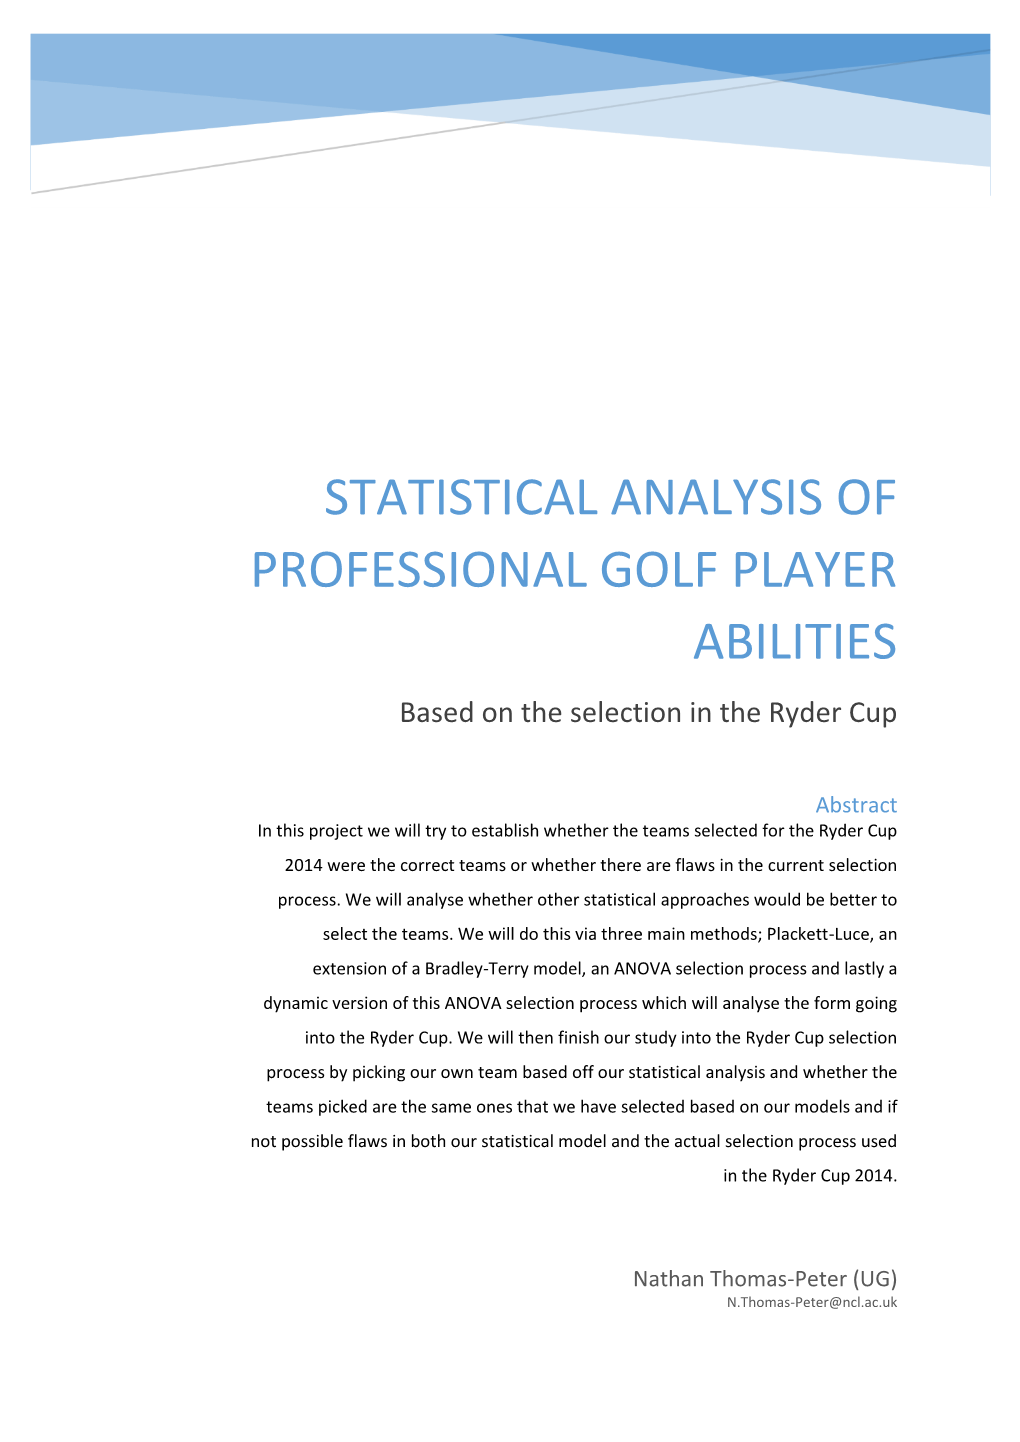 STATISTICAL ANALYSIS of PROFESSIONAL GOLF PLAYER ABILITIES Based on the Selection in the Ryder Cup